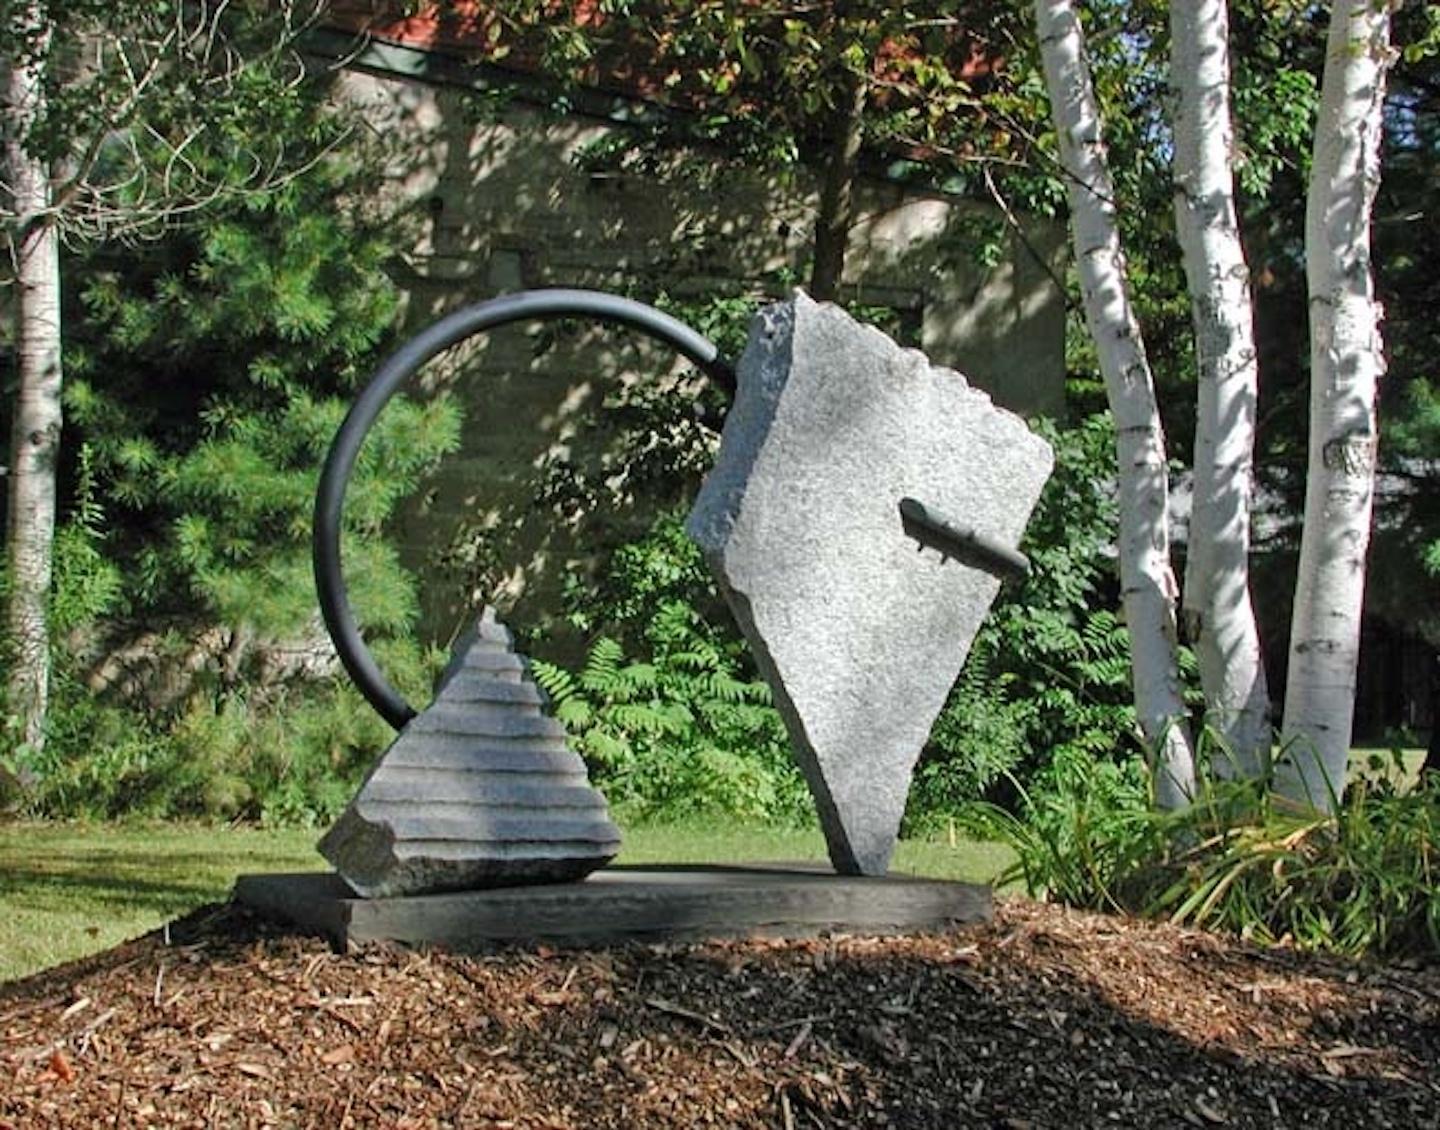 Stone and metal,usually granite or slate and found object steel are central in my sculpture. The interaction of these materials is a major focus. On the most basic level the work is about the marriage of the natural with the human-made. Stone is